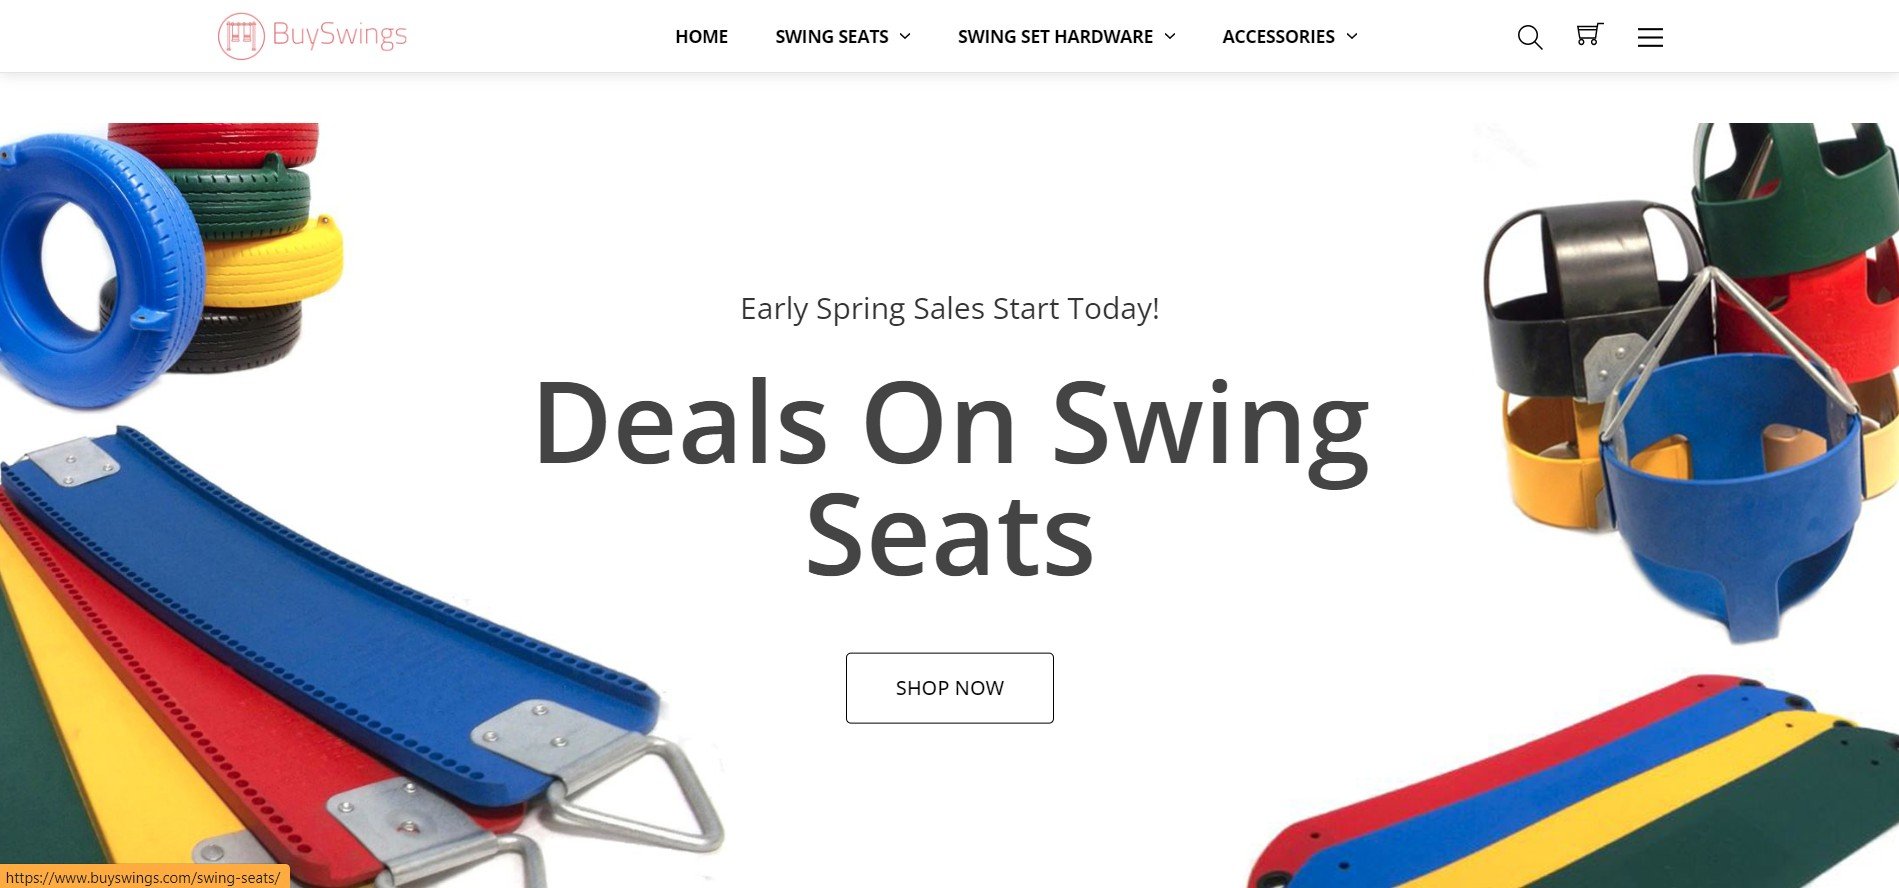 BuySwings carries a wide variety of swing set accessories, swing seats, chains, etc